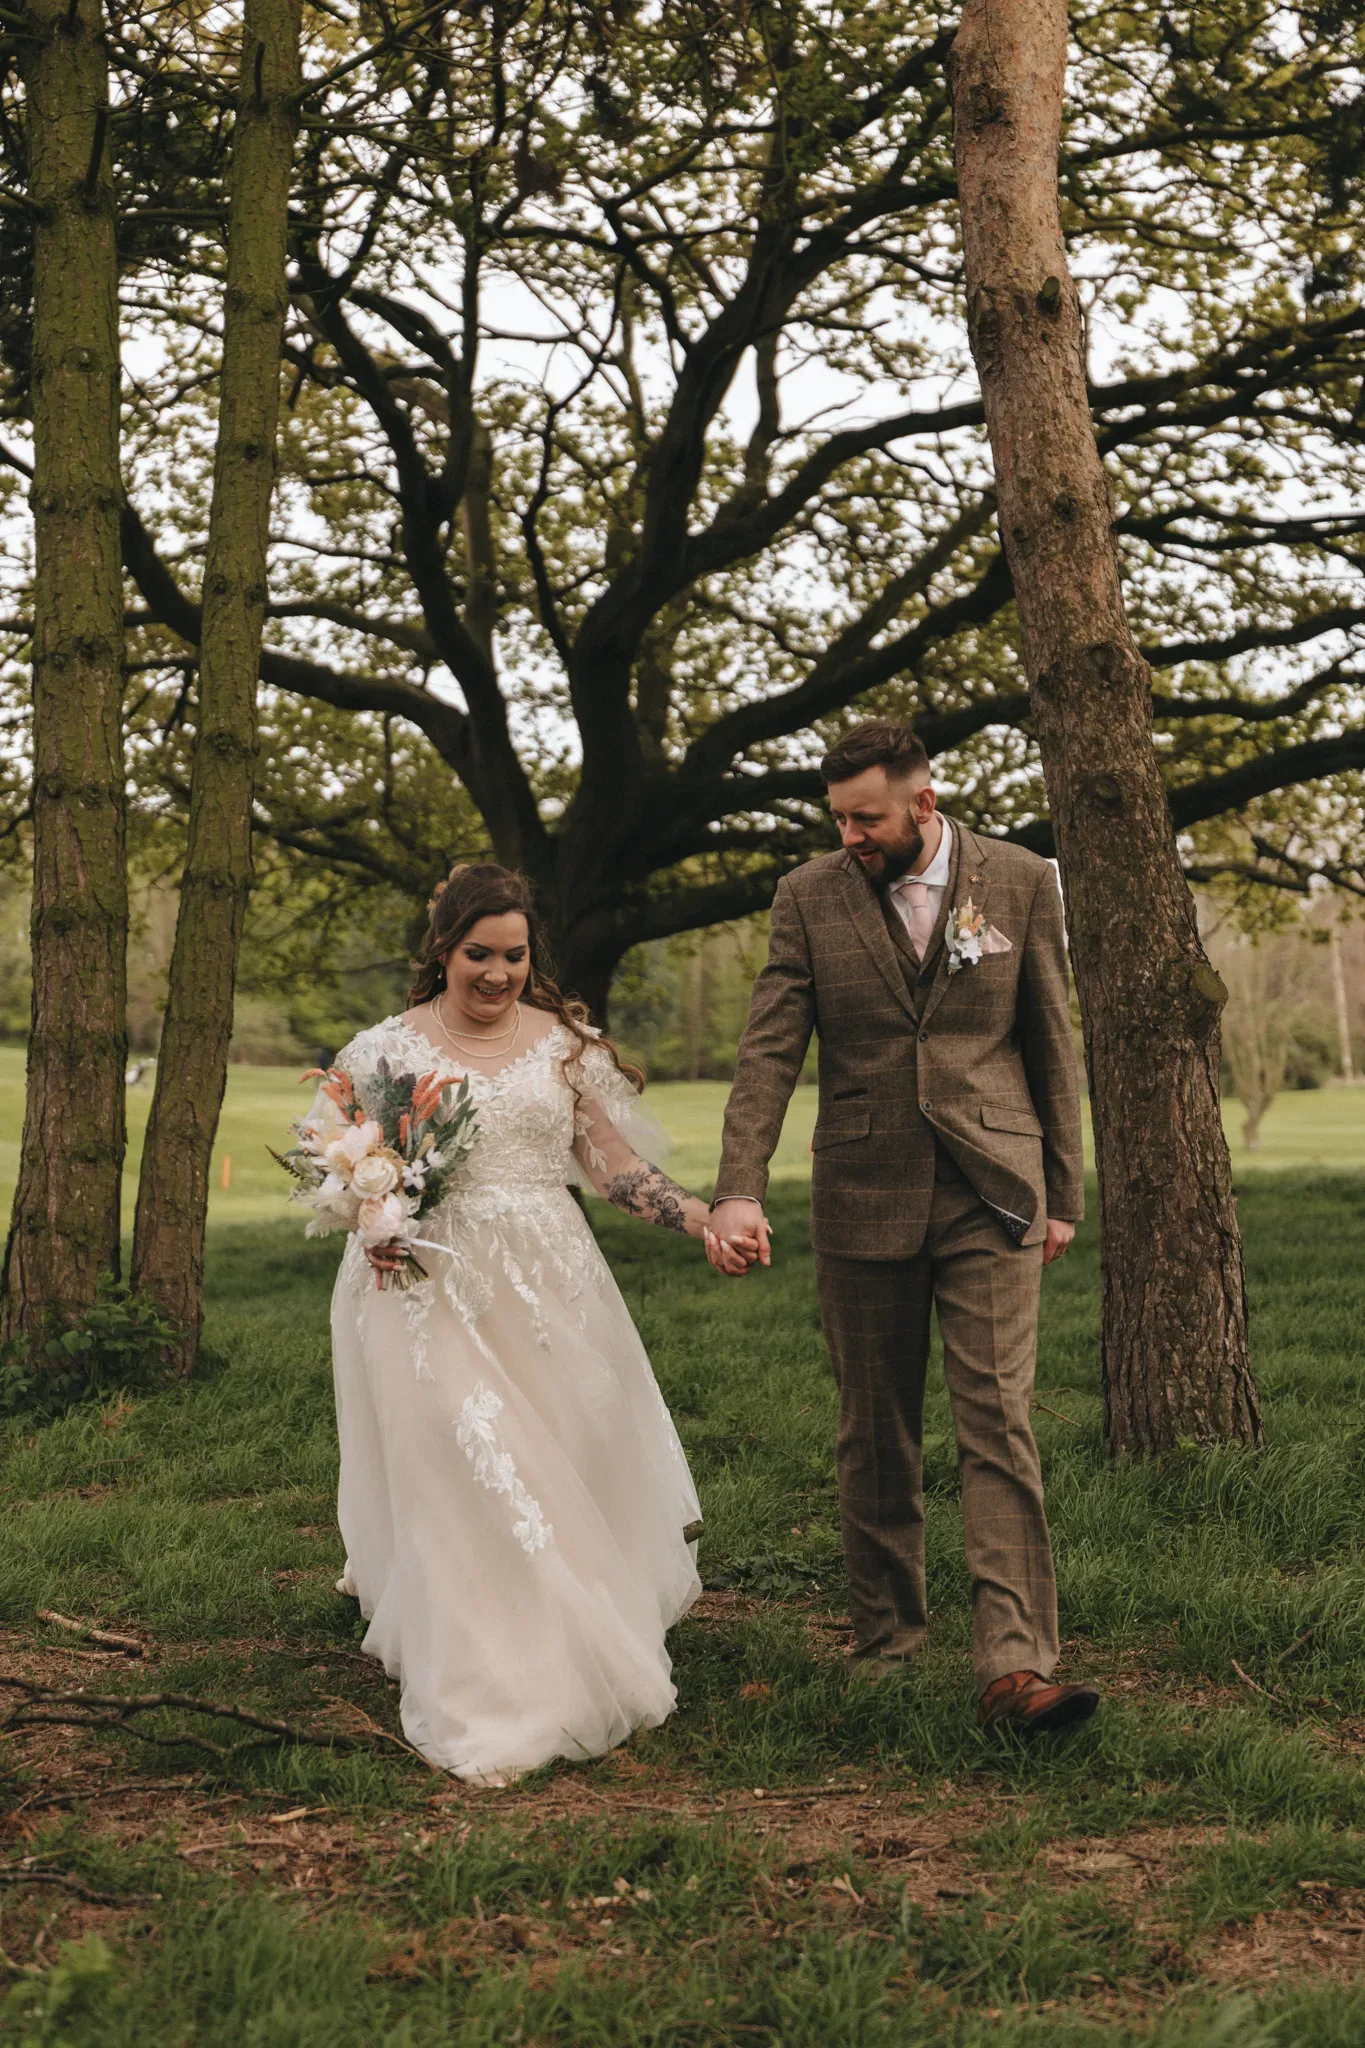 A bride and groom walk hand in hand in a grassy park with large trees, smiling joyfully. the bride wears a white lace gown and holds a bouquet, while the groom is in a tweed suit.